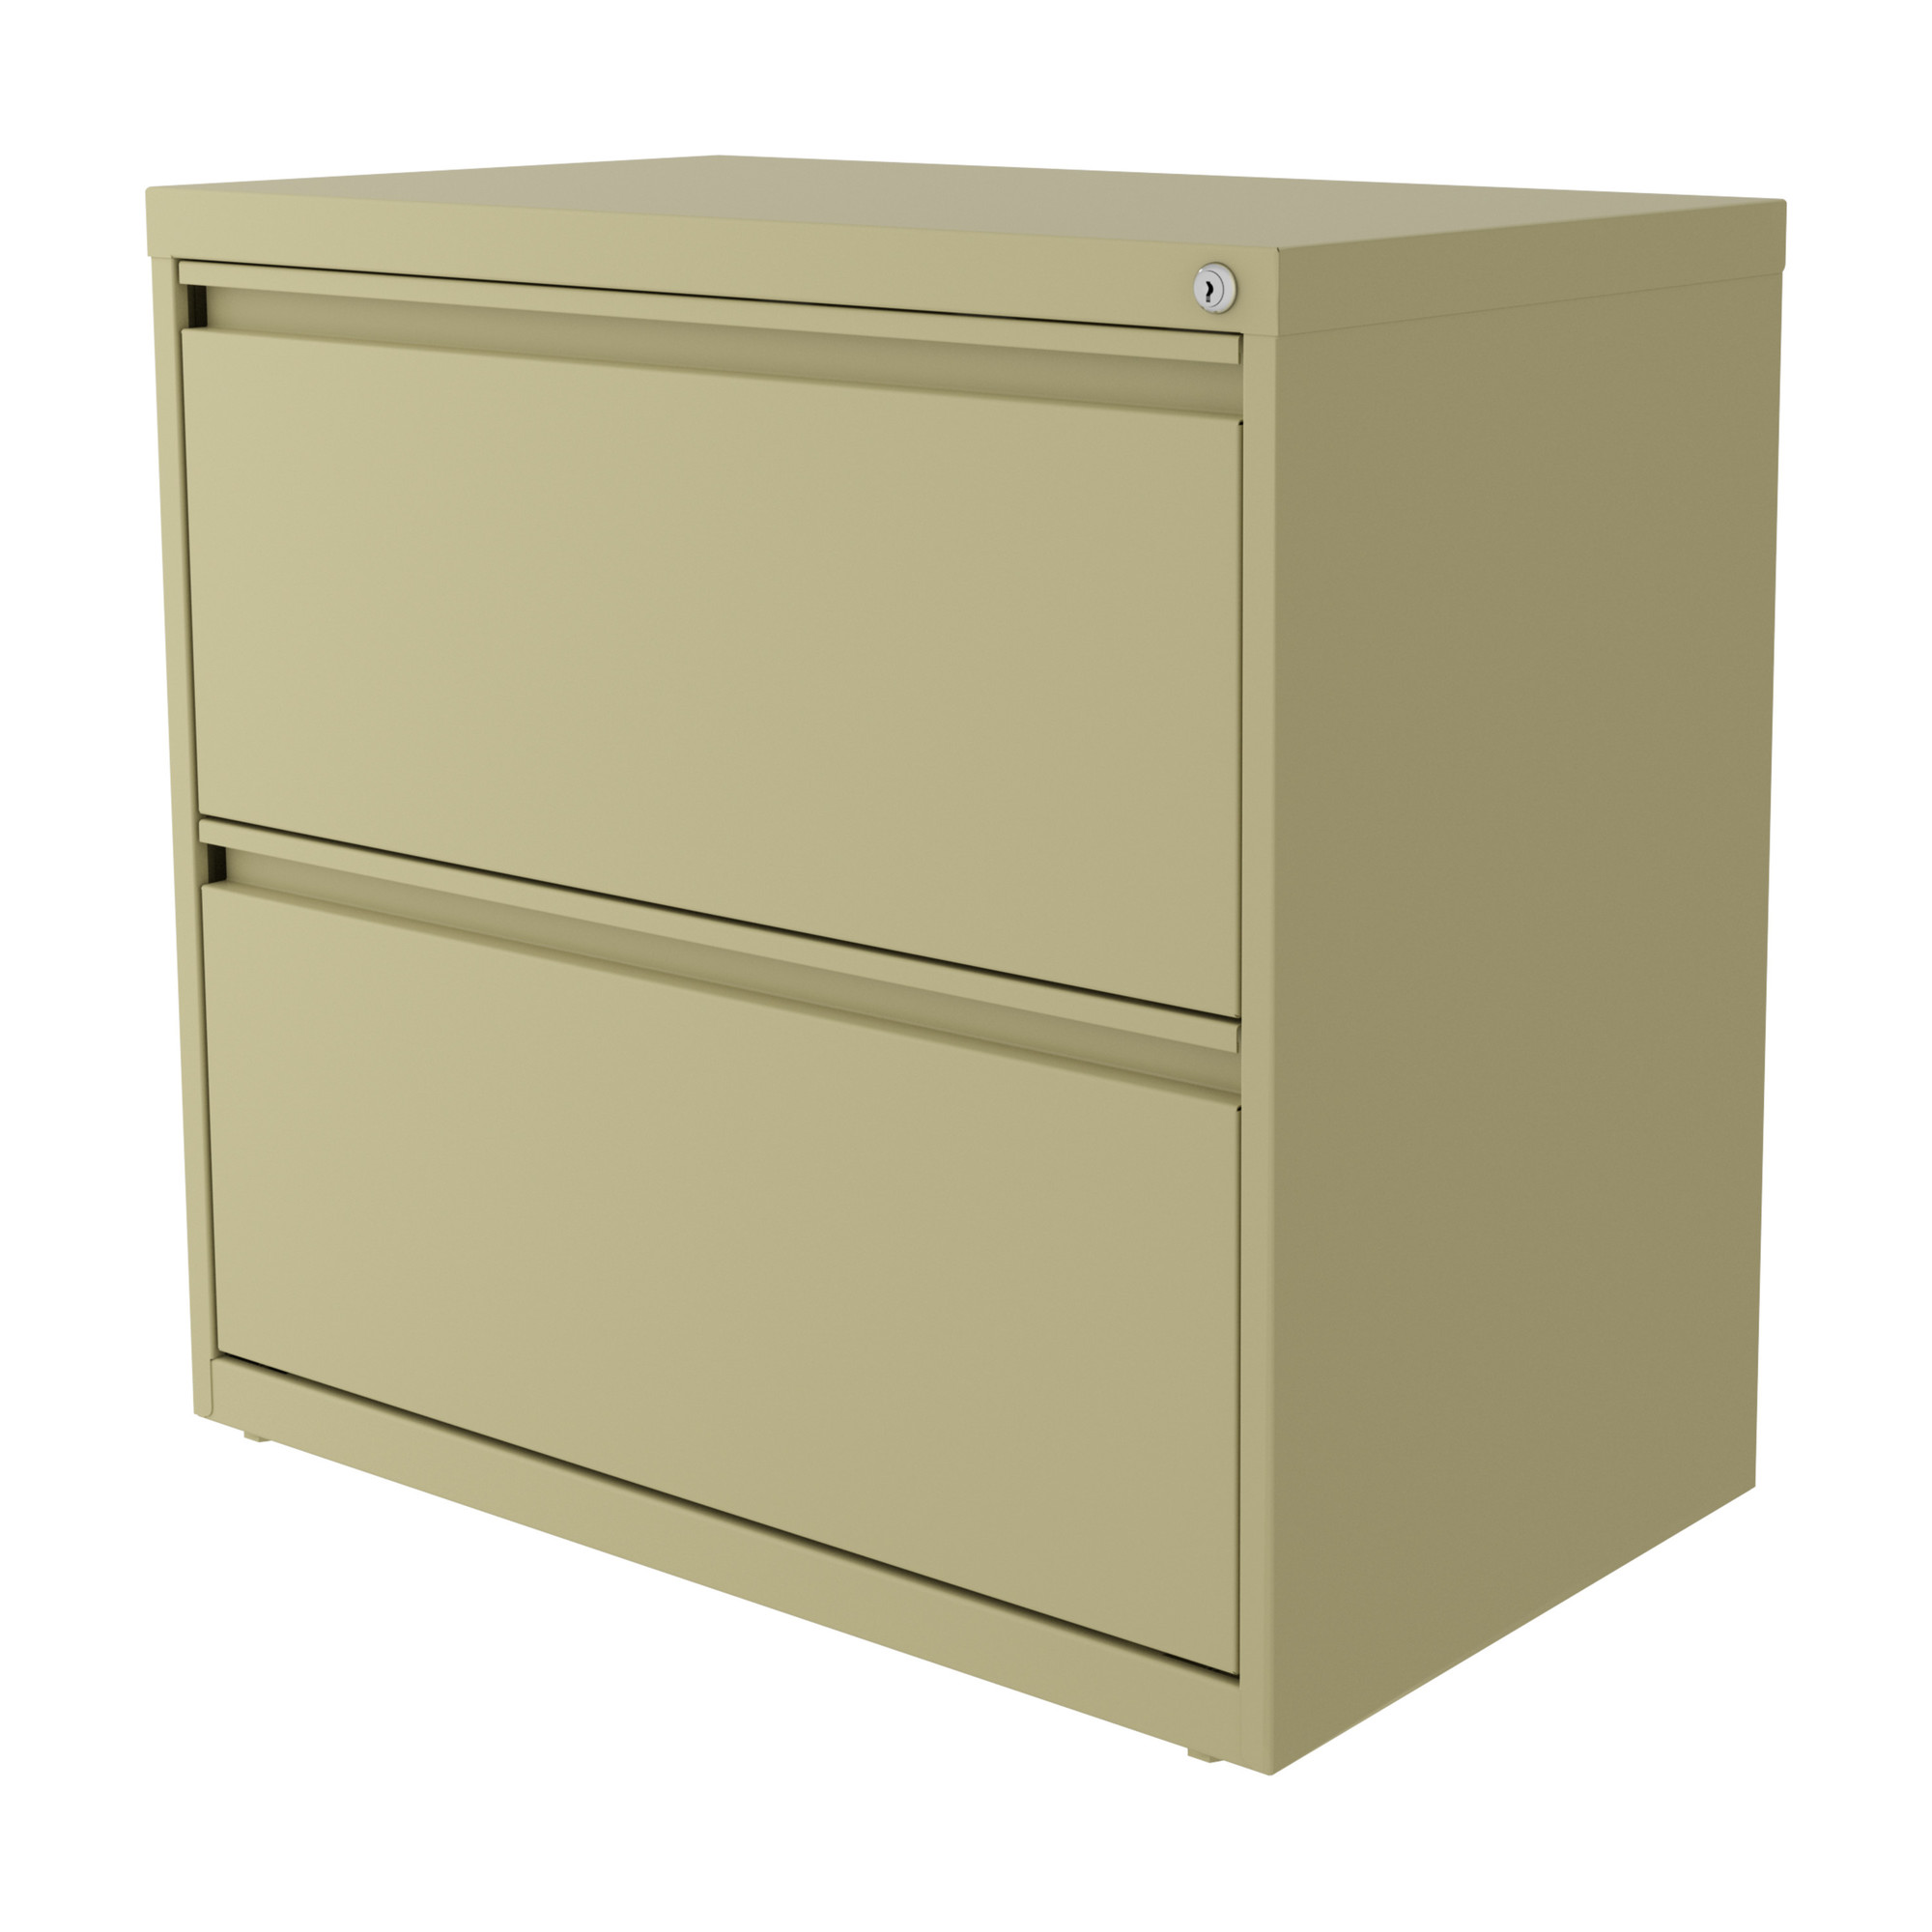 Hirsh Industries, 2 Drawer Lateral 101 File Cabinet, Width 30 in, Depth 17.63 in, Height 27.75 in, Model 24082